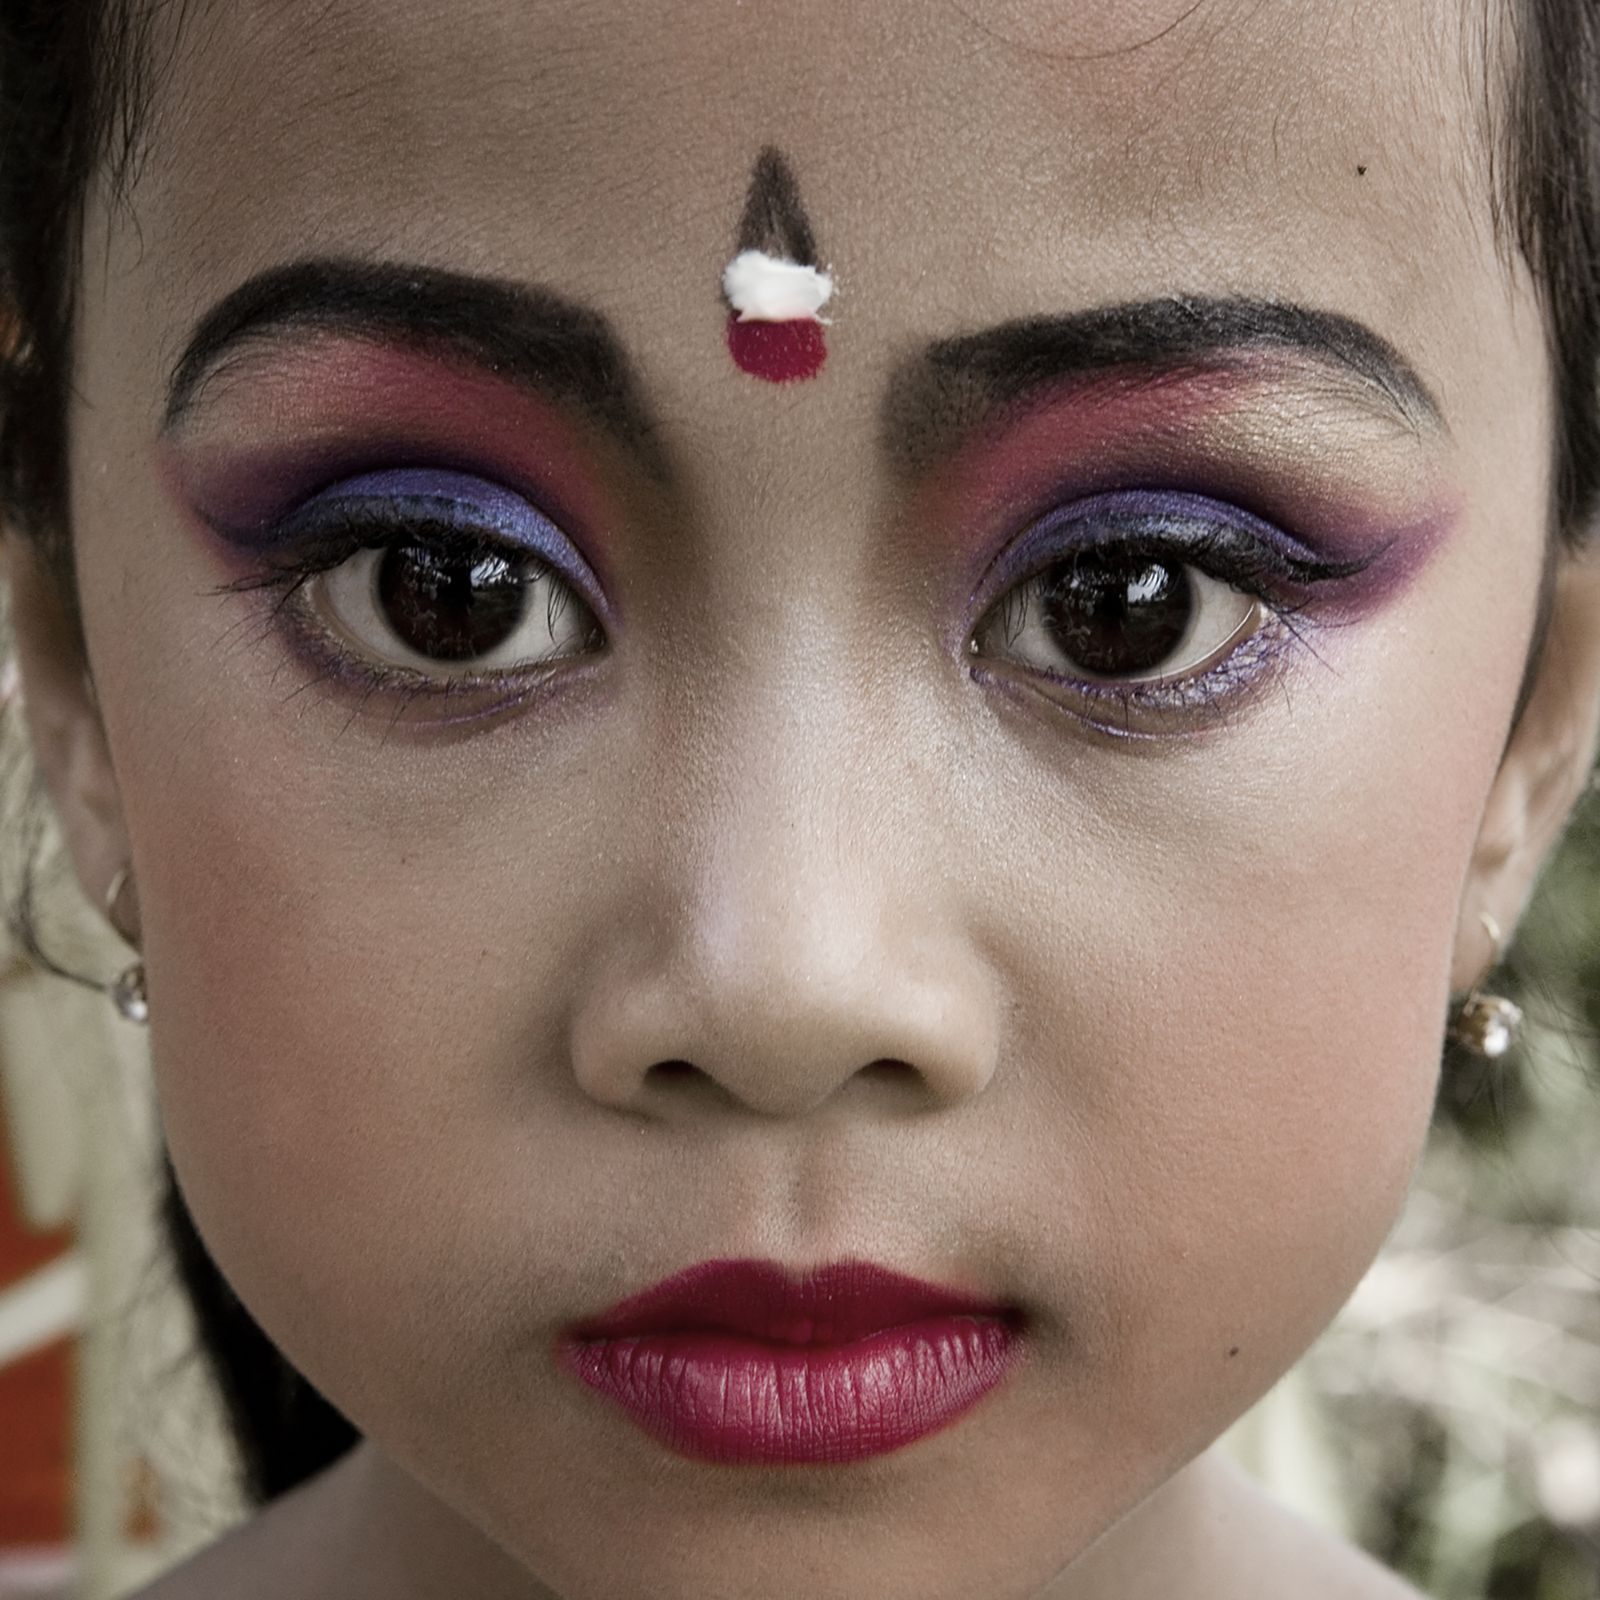 © bruna rotunno - Image from the Women in Bali photography project